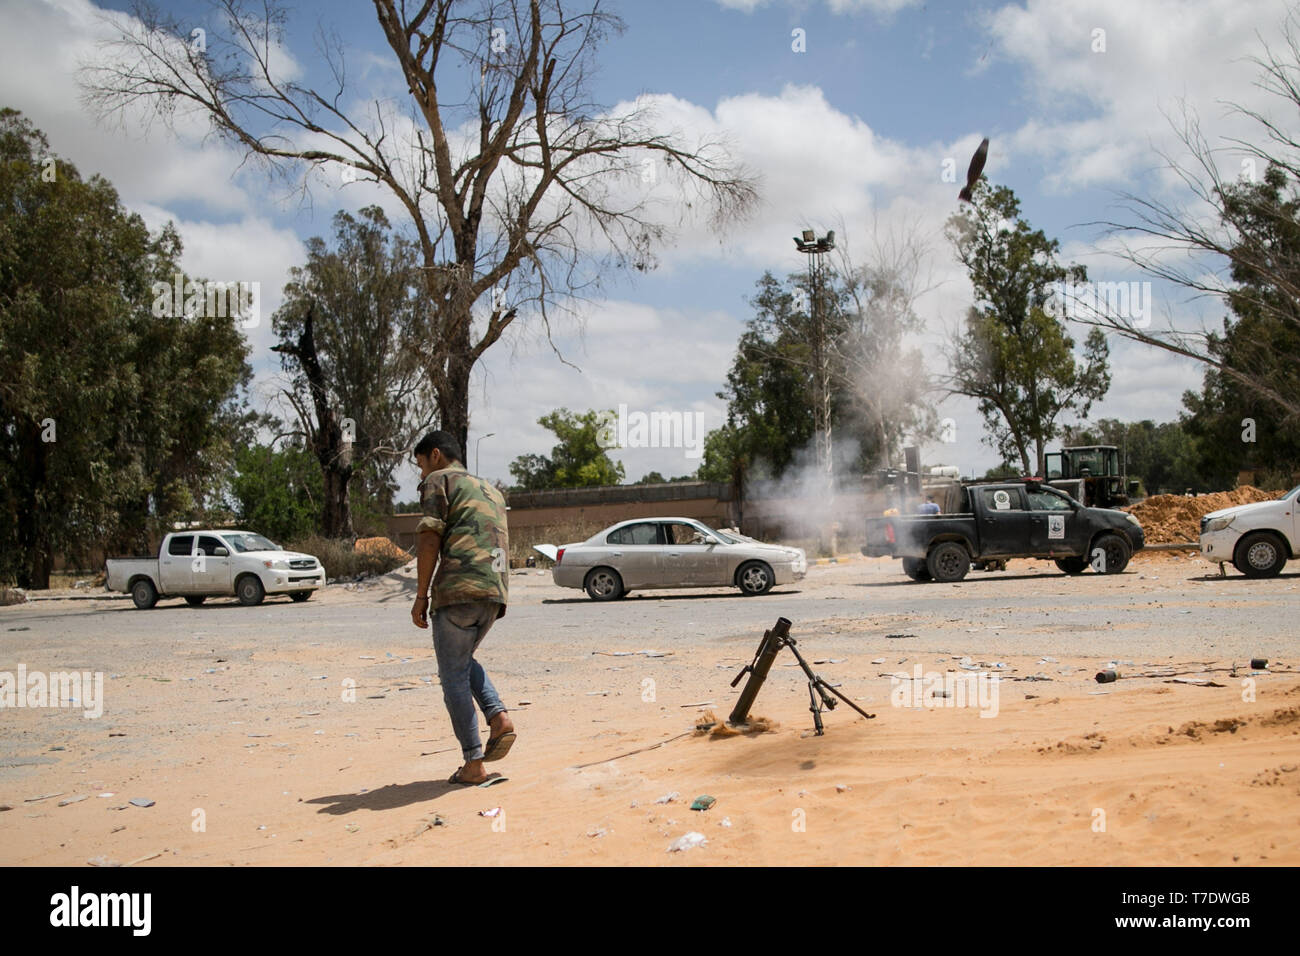 Tripoli, Libya. 6th May, 2019. A fighter from forces of the UN-backed Libyan government fires at east-based troops during clashes in Salah Al-Din frontline, Tripoli, Libya, on May 6, 2019. A total of 432 people have been killed and 2,069 others injured in the fighting between the UN-backed Libyan government and the east-based army in and around the capital Tripoli, the World Health Organization (WHO) said Monday. Credit: Amru Salahuddien/Xinhua/Alamy Live News Stock Photo